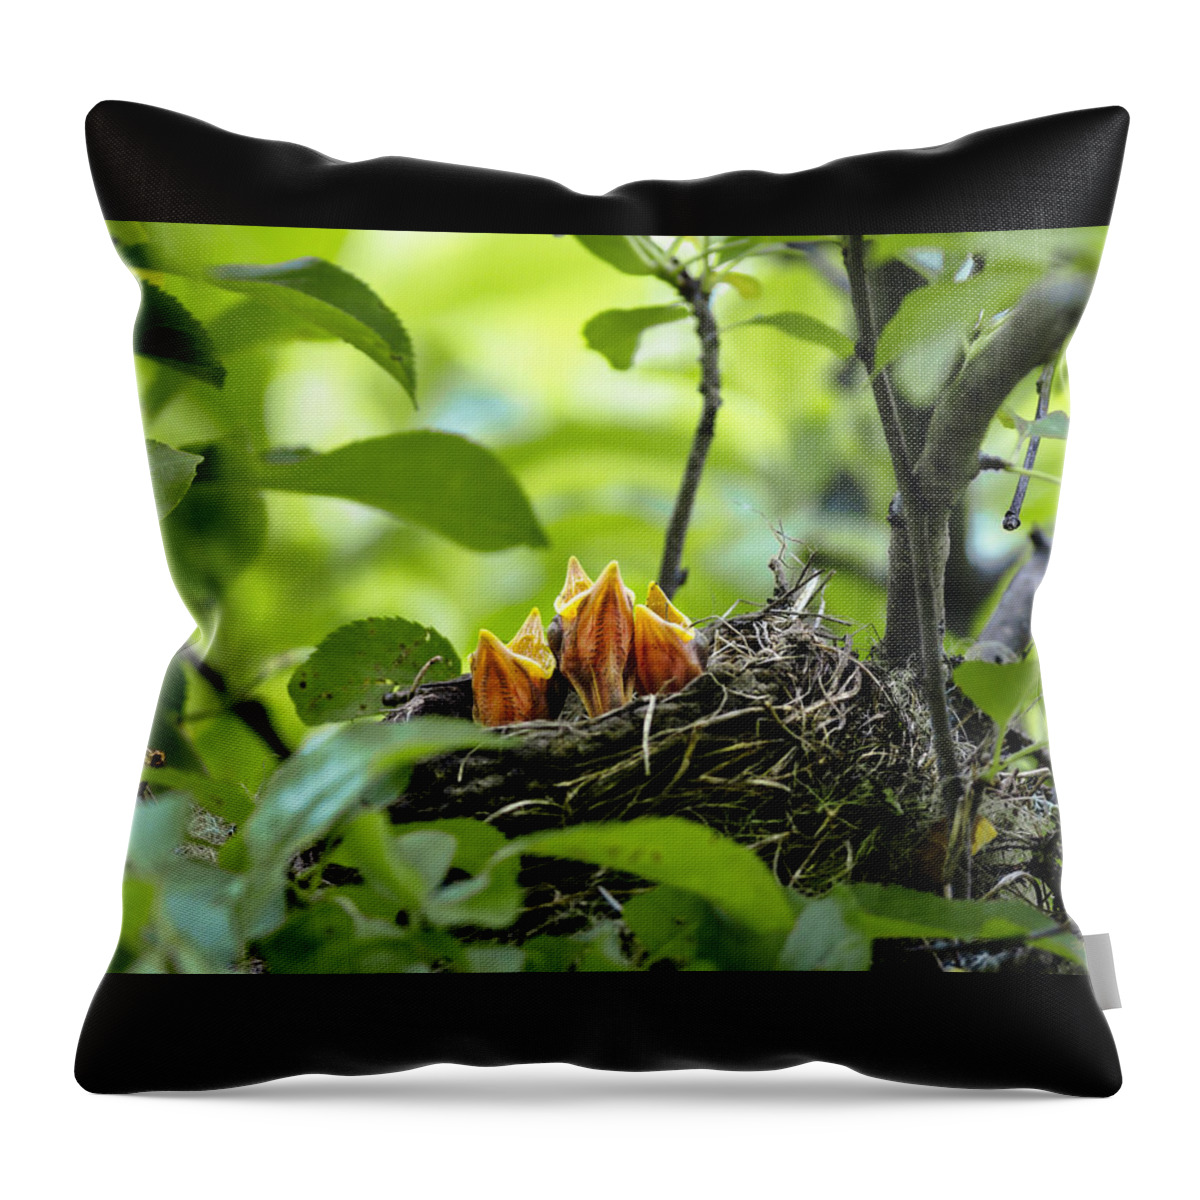 Three Hungry Nestlings Throw Pillow featuring the photograph Feed Me Times Three by Marty Saccone